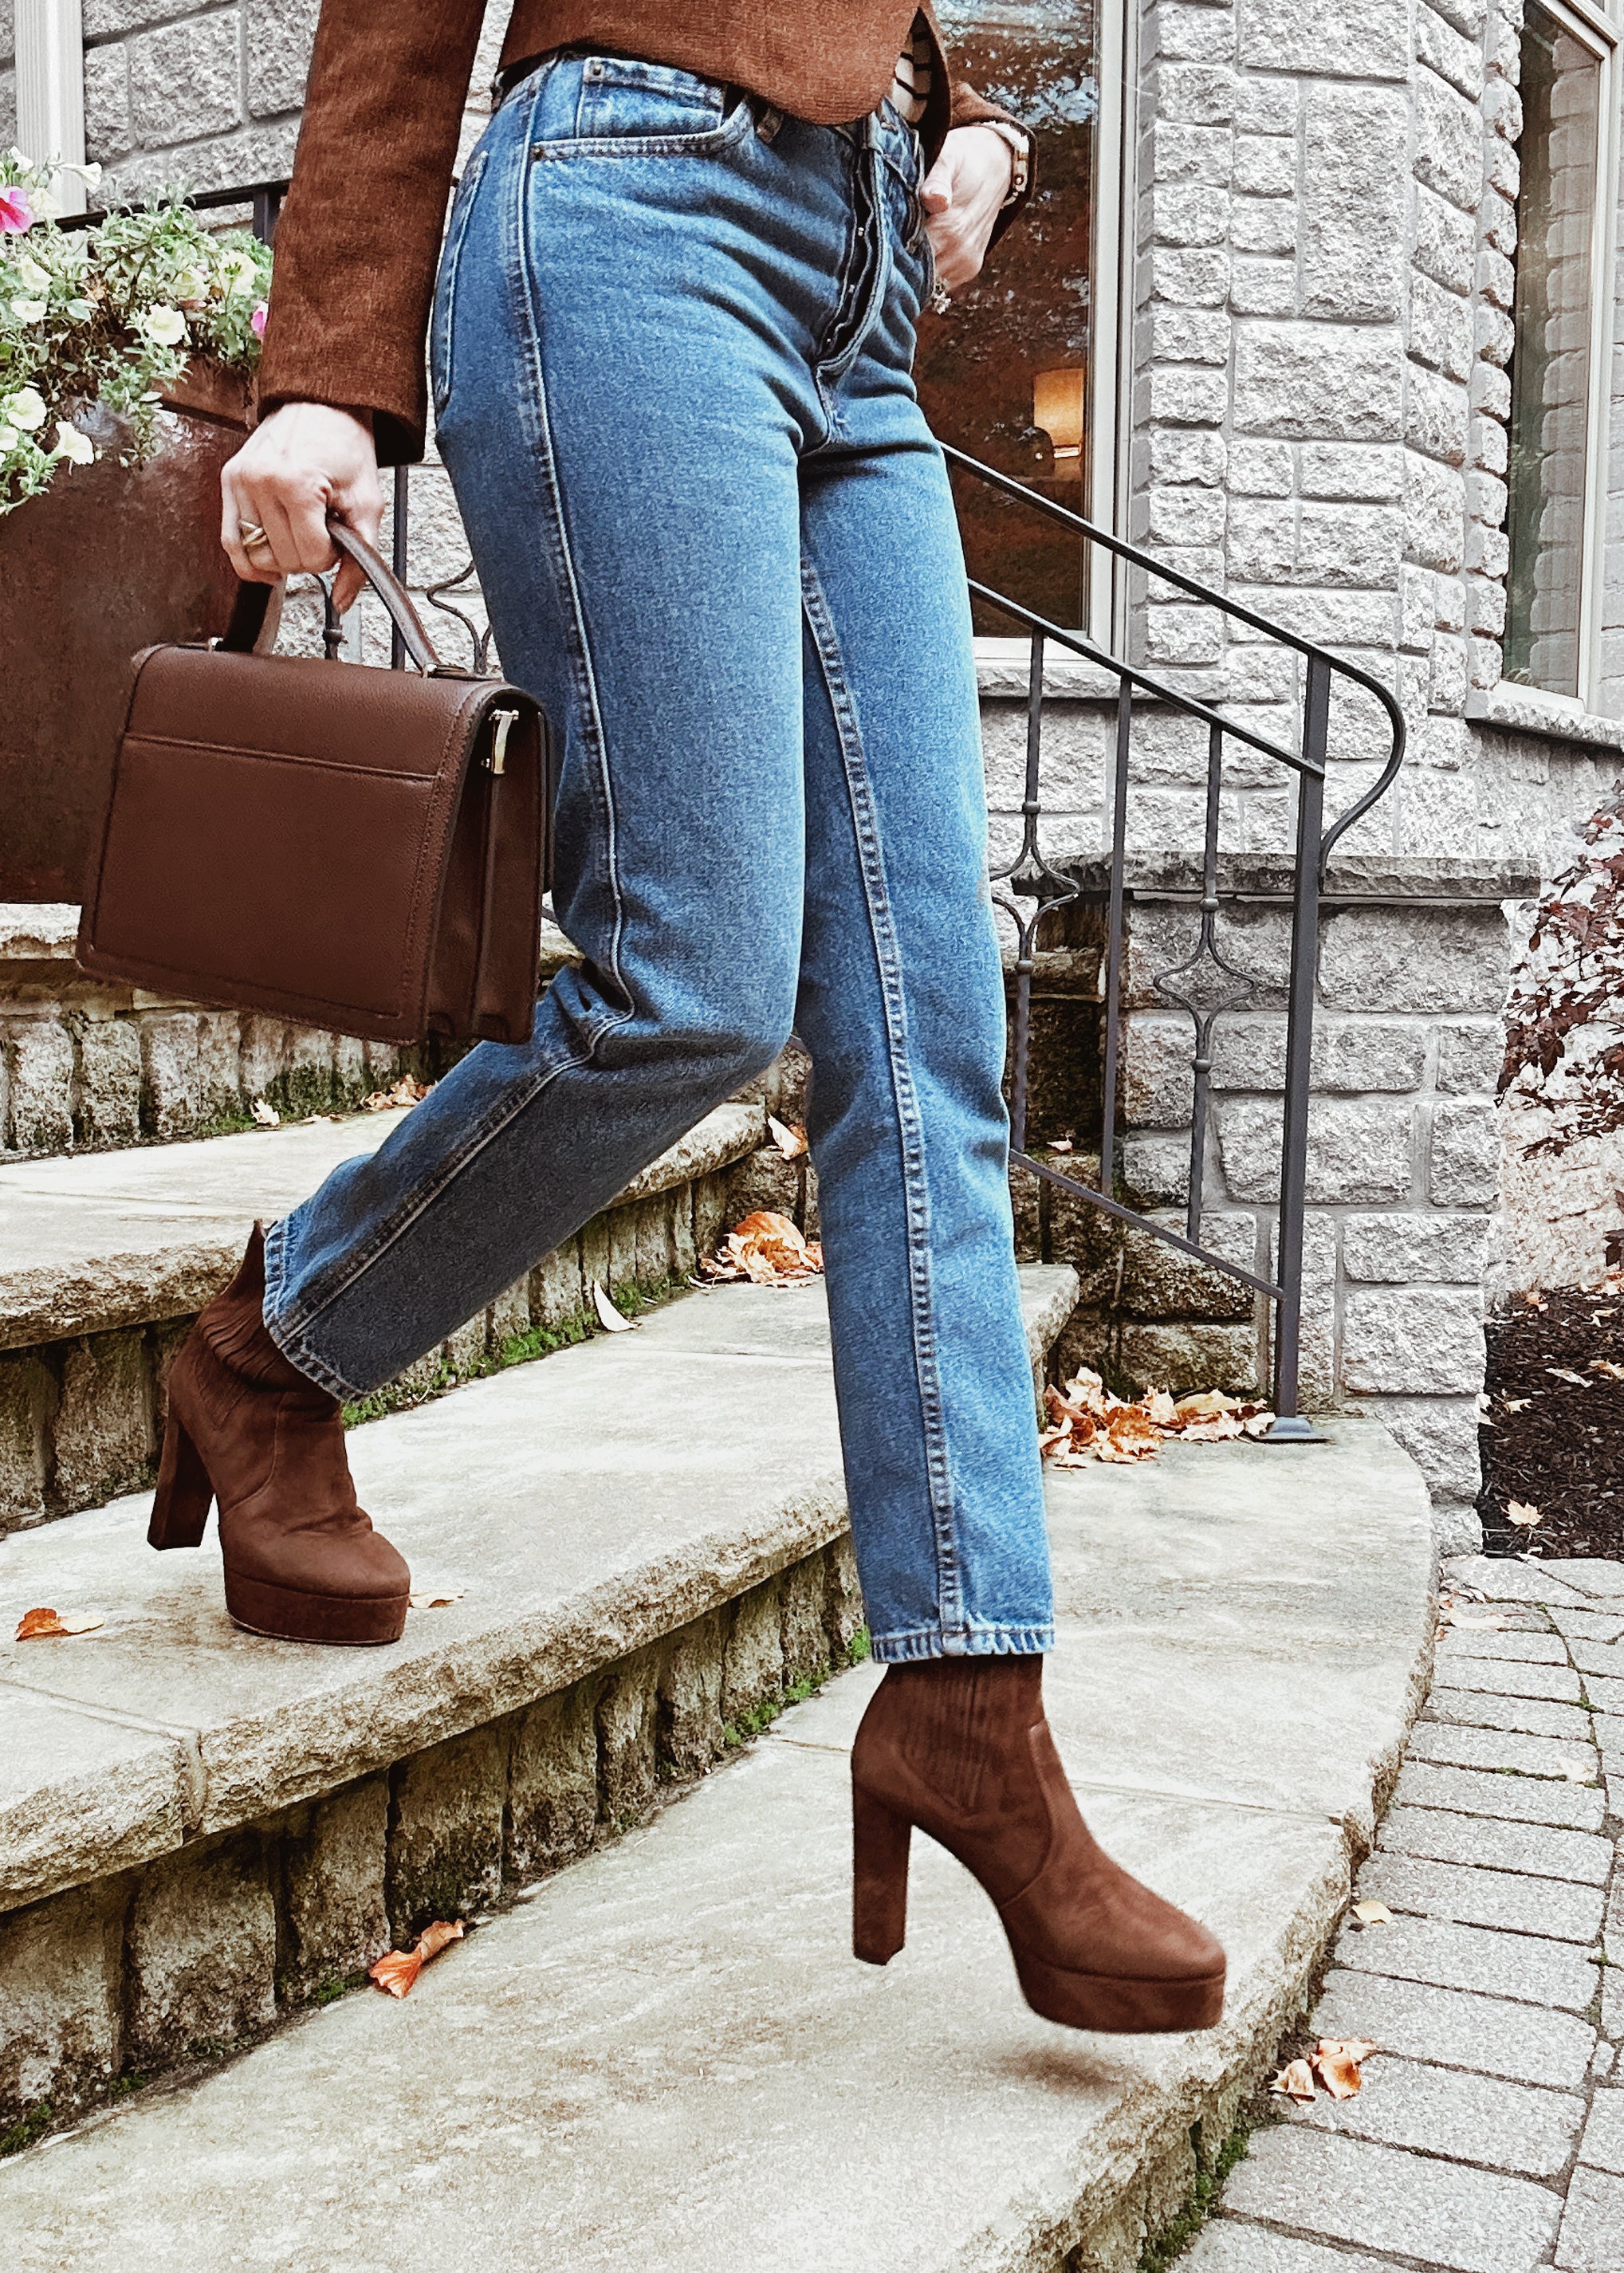 These chocolate Pilar platform boots understood the assignment. They are so comfortable!